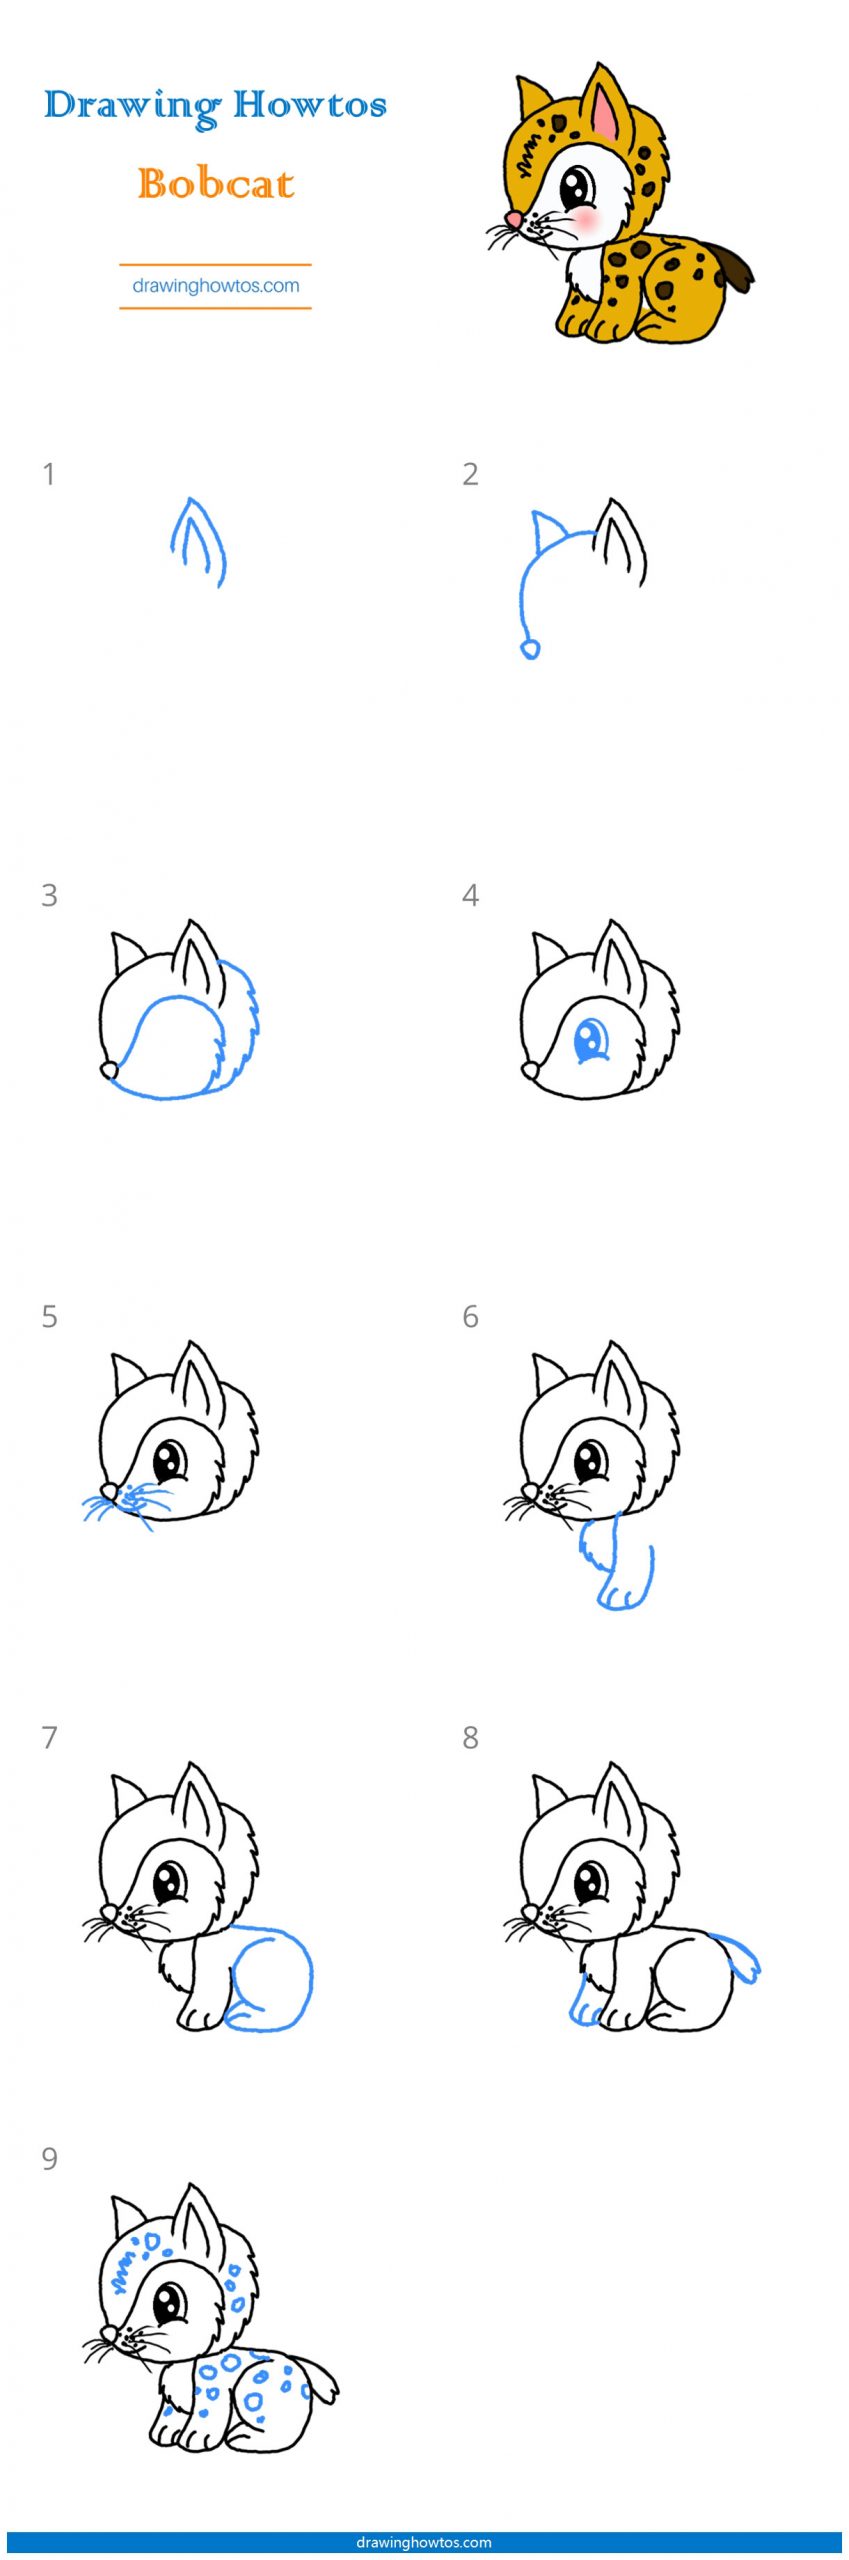 How to Draw a Bobcat Step by Step